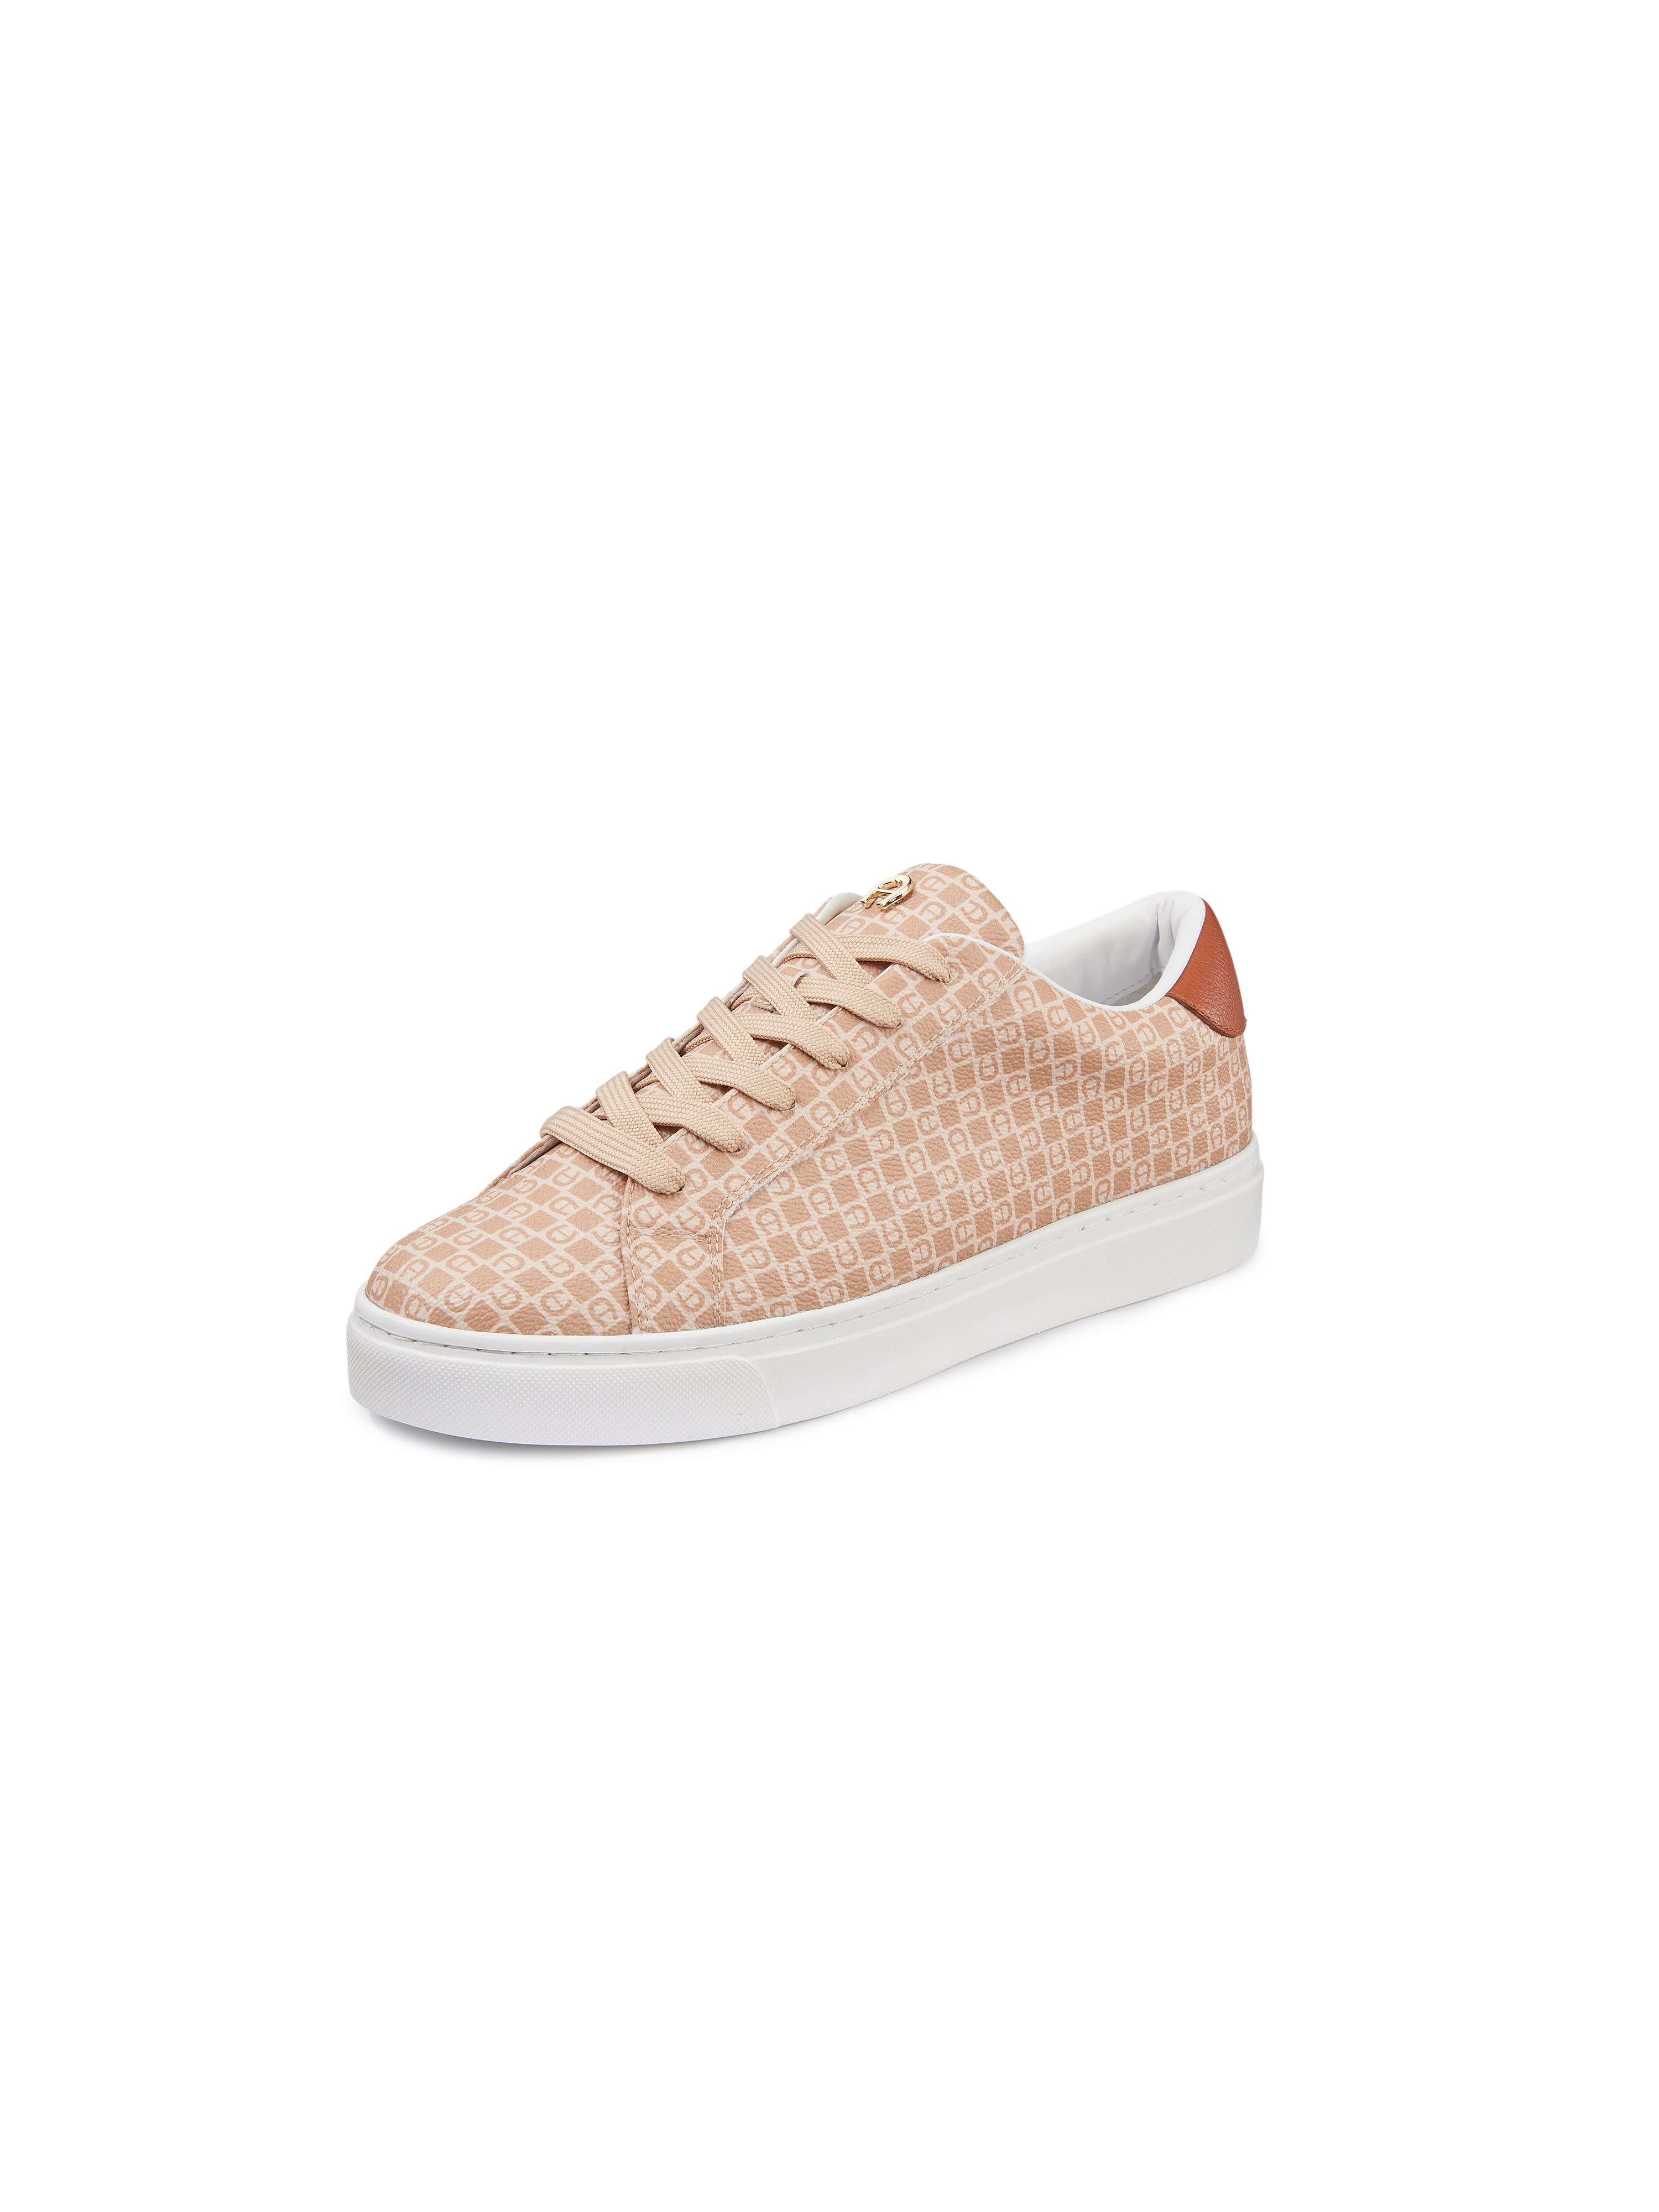 Les sneakers Diane  Aigner beige taille 37